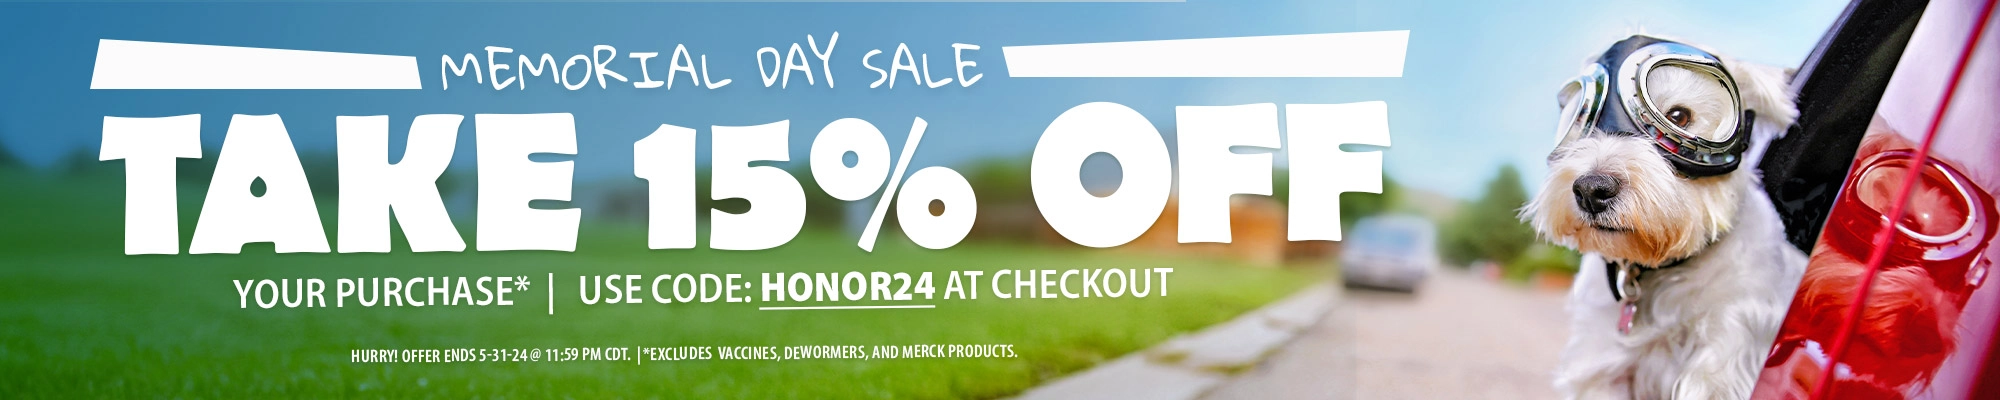 Save 15% with Code: Honor24